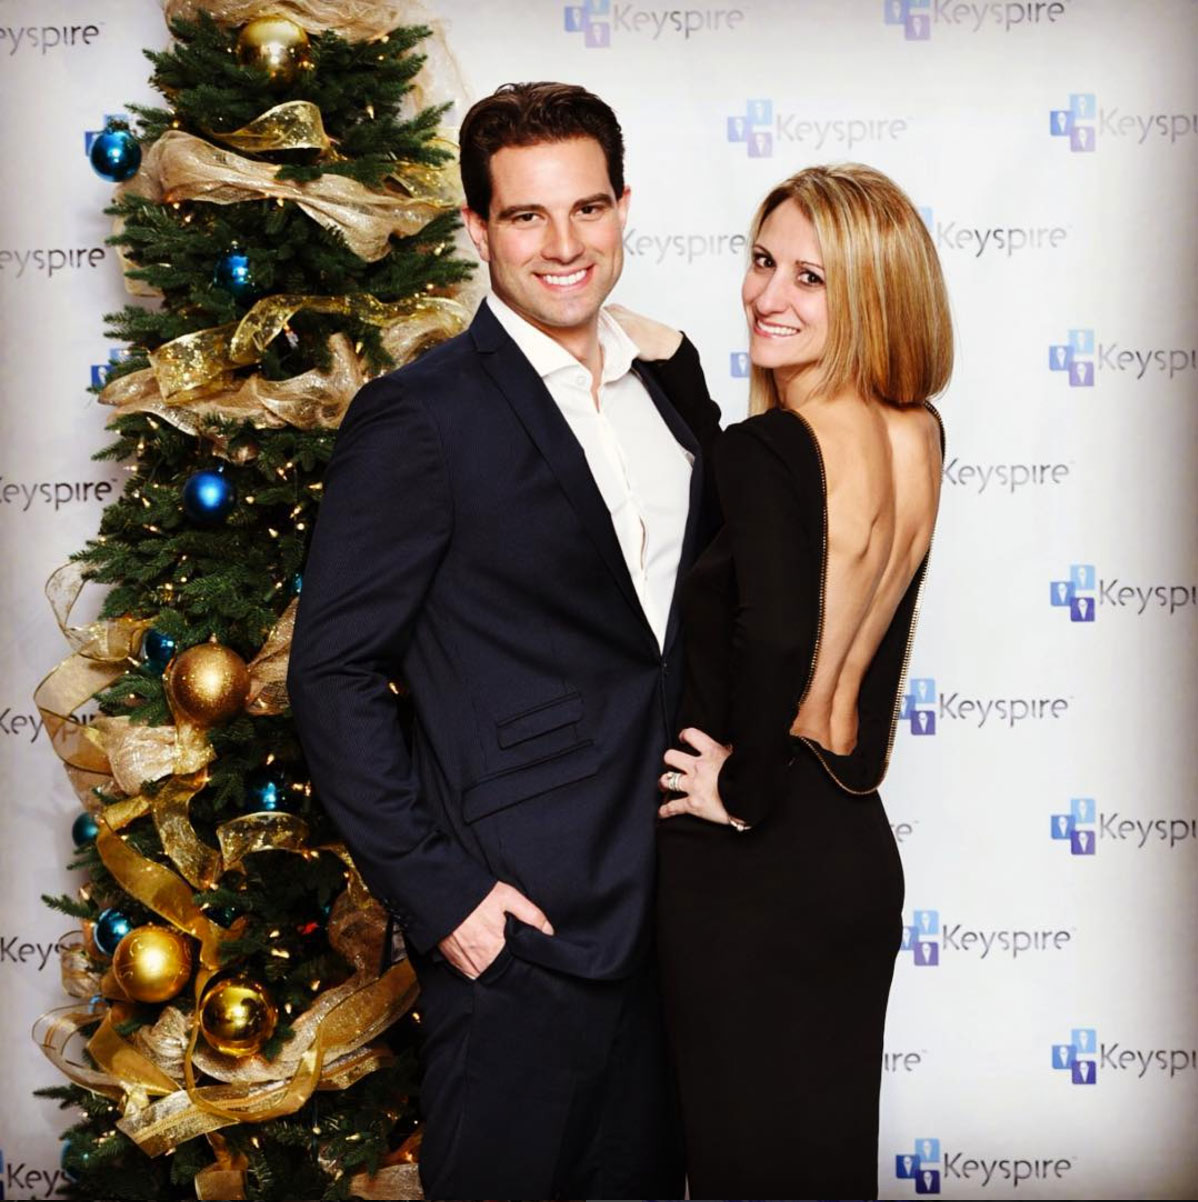 Scott and Sabrina McGillivray dressed up for the holidays